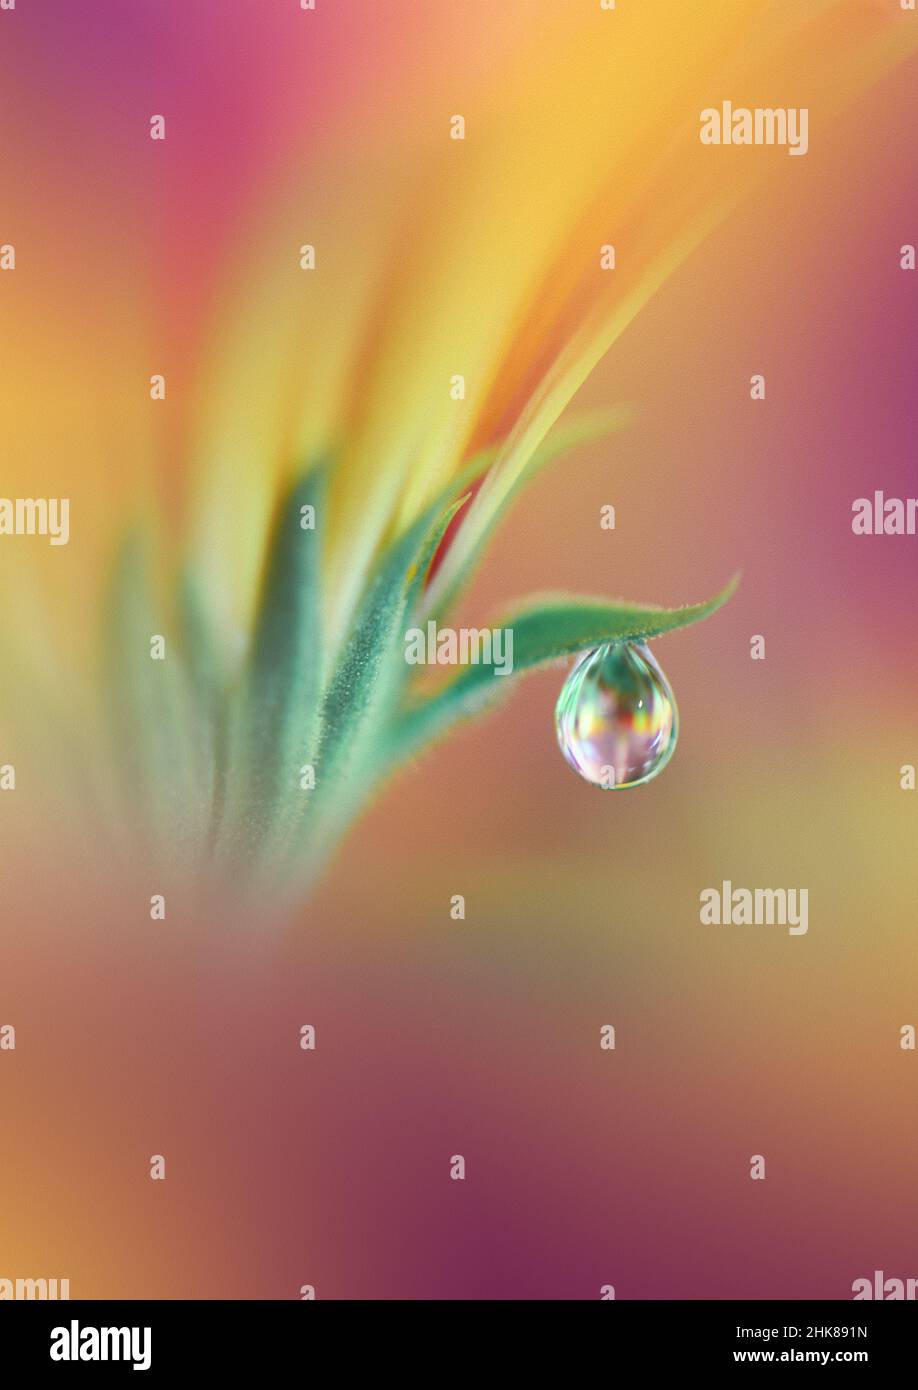 Beautiful Macro Photo.Colorful Flowers.Border Art Design.Magic Light.Close up Photography.Conceptual Abstract Image.Yellow and Green Background.Water. Stock Photo